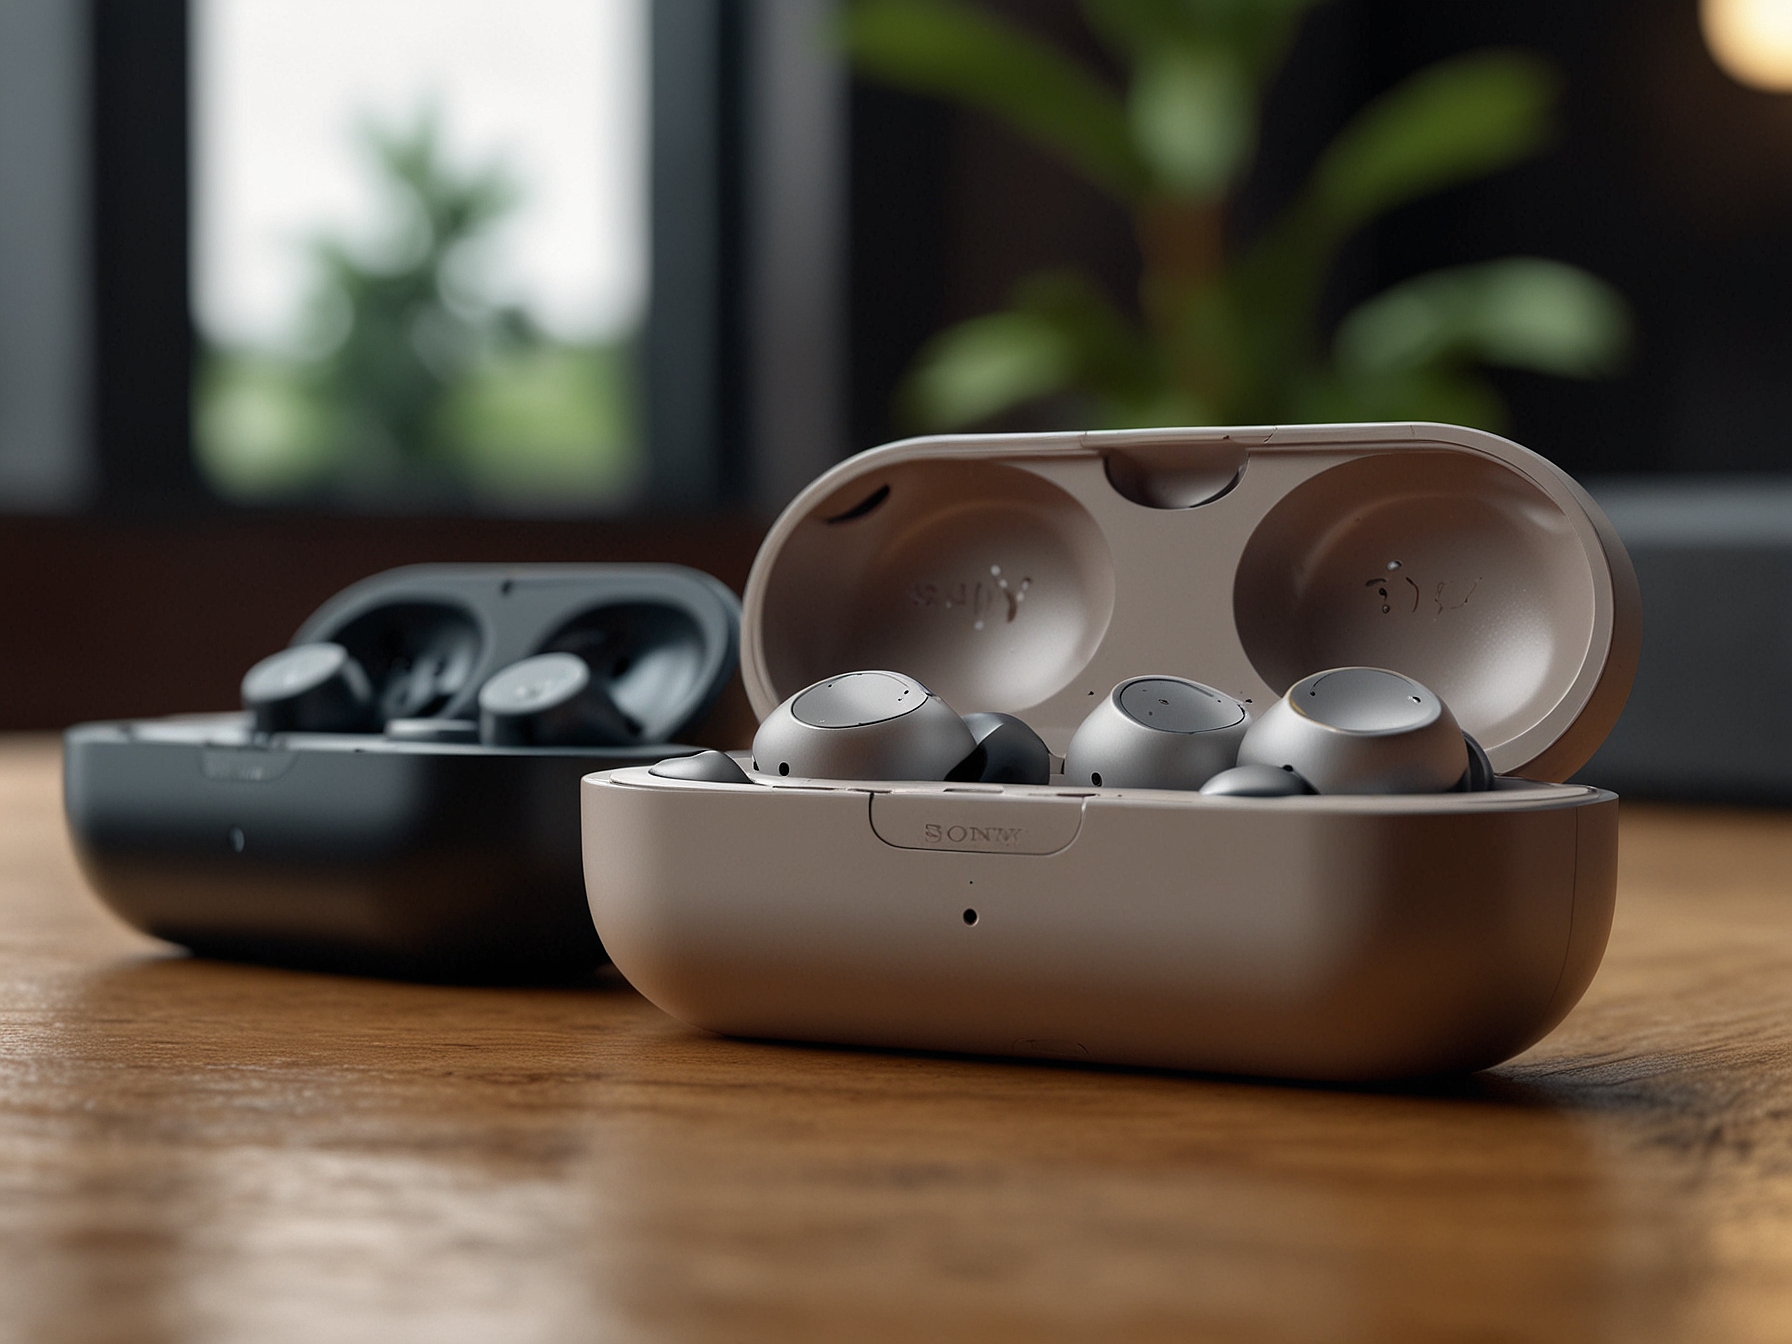 A variety of top-brand wireless earbuds on display, showcasing the Sony WF-1000XM4 with noise-canceling features, ideal for commuters and travelers enjoying the World Music Day Amazon sale.